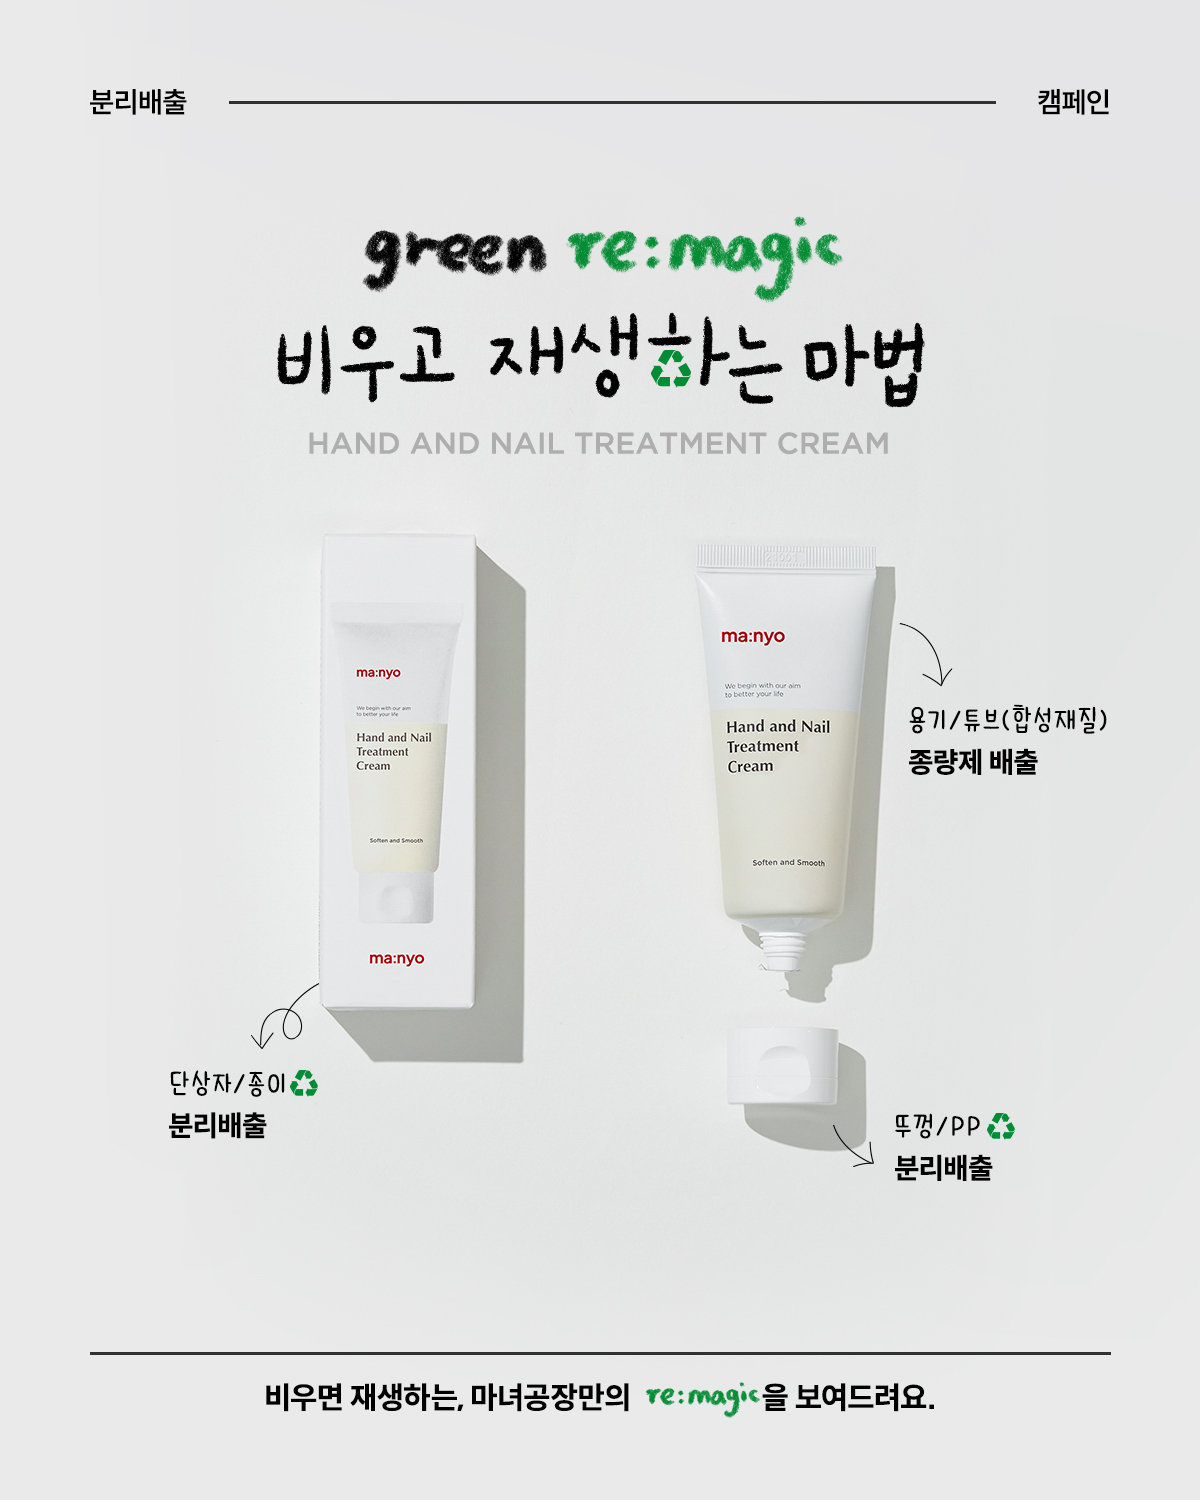 hand_and_nail_treatment_cream_recycle_1200_110746.jpg